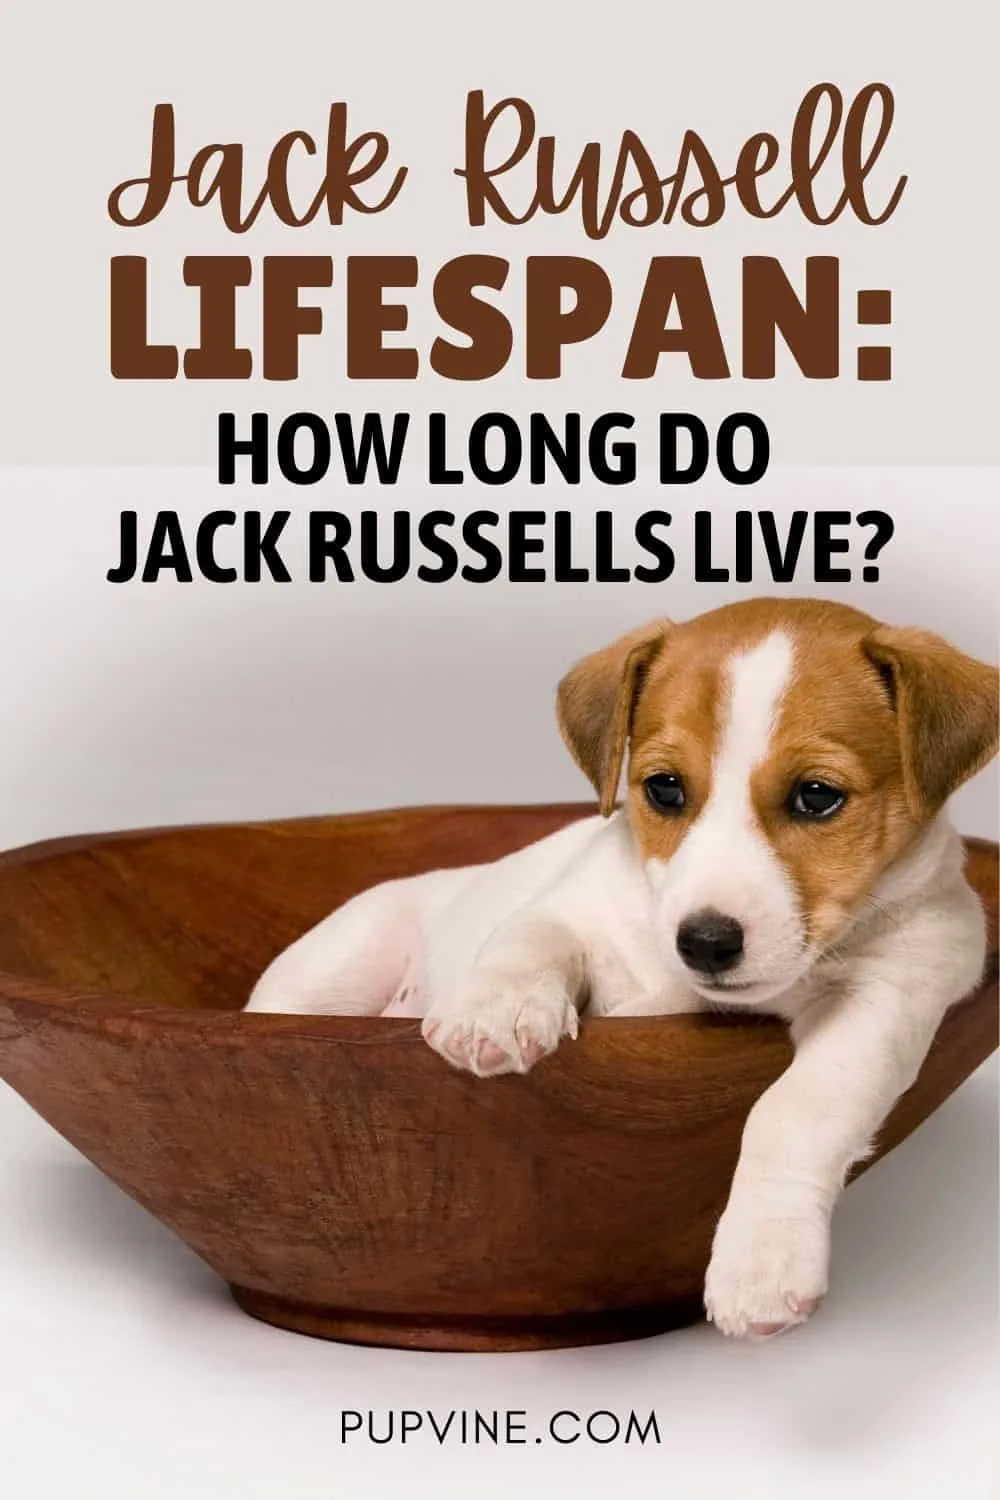 Jack Russell Lifespan How Long Do Jack Russells Live